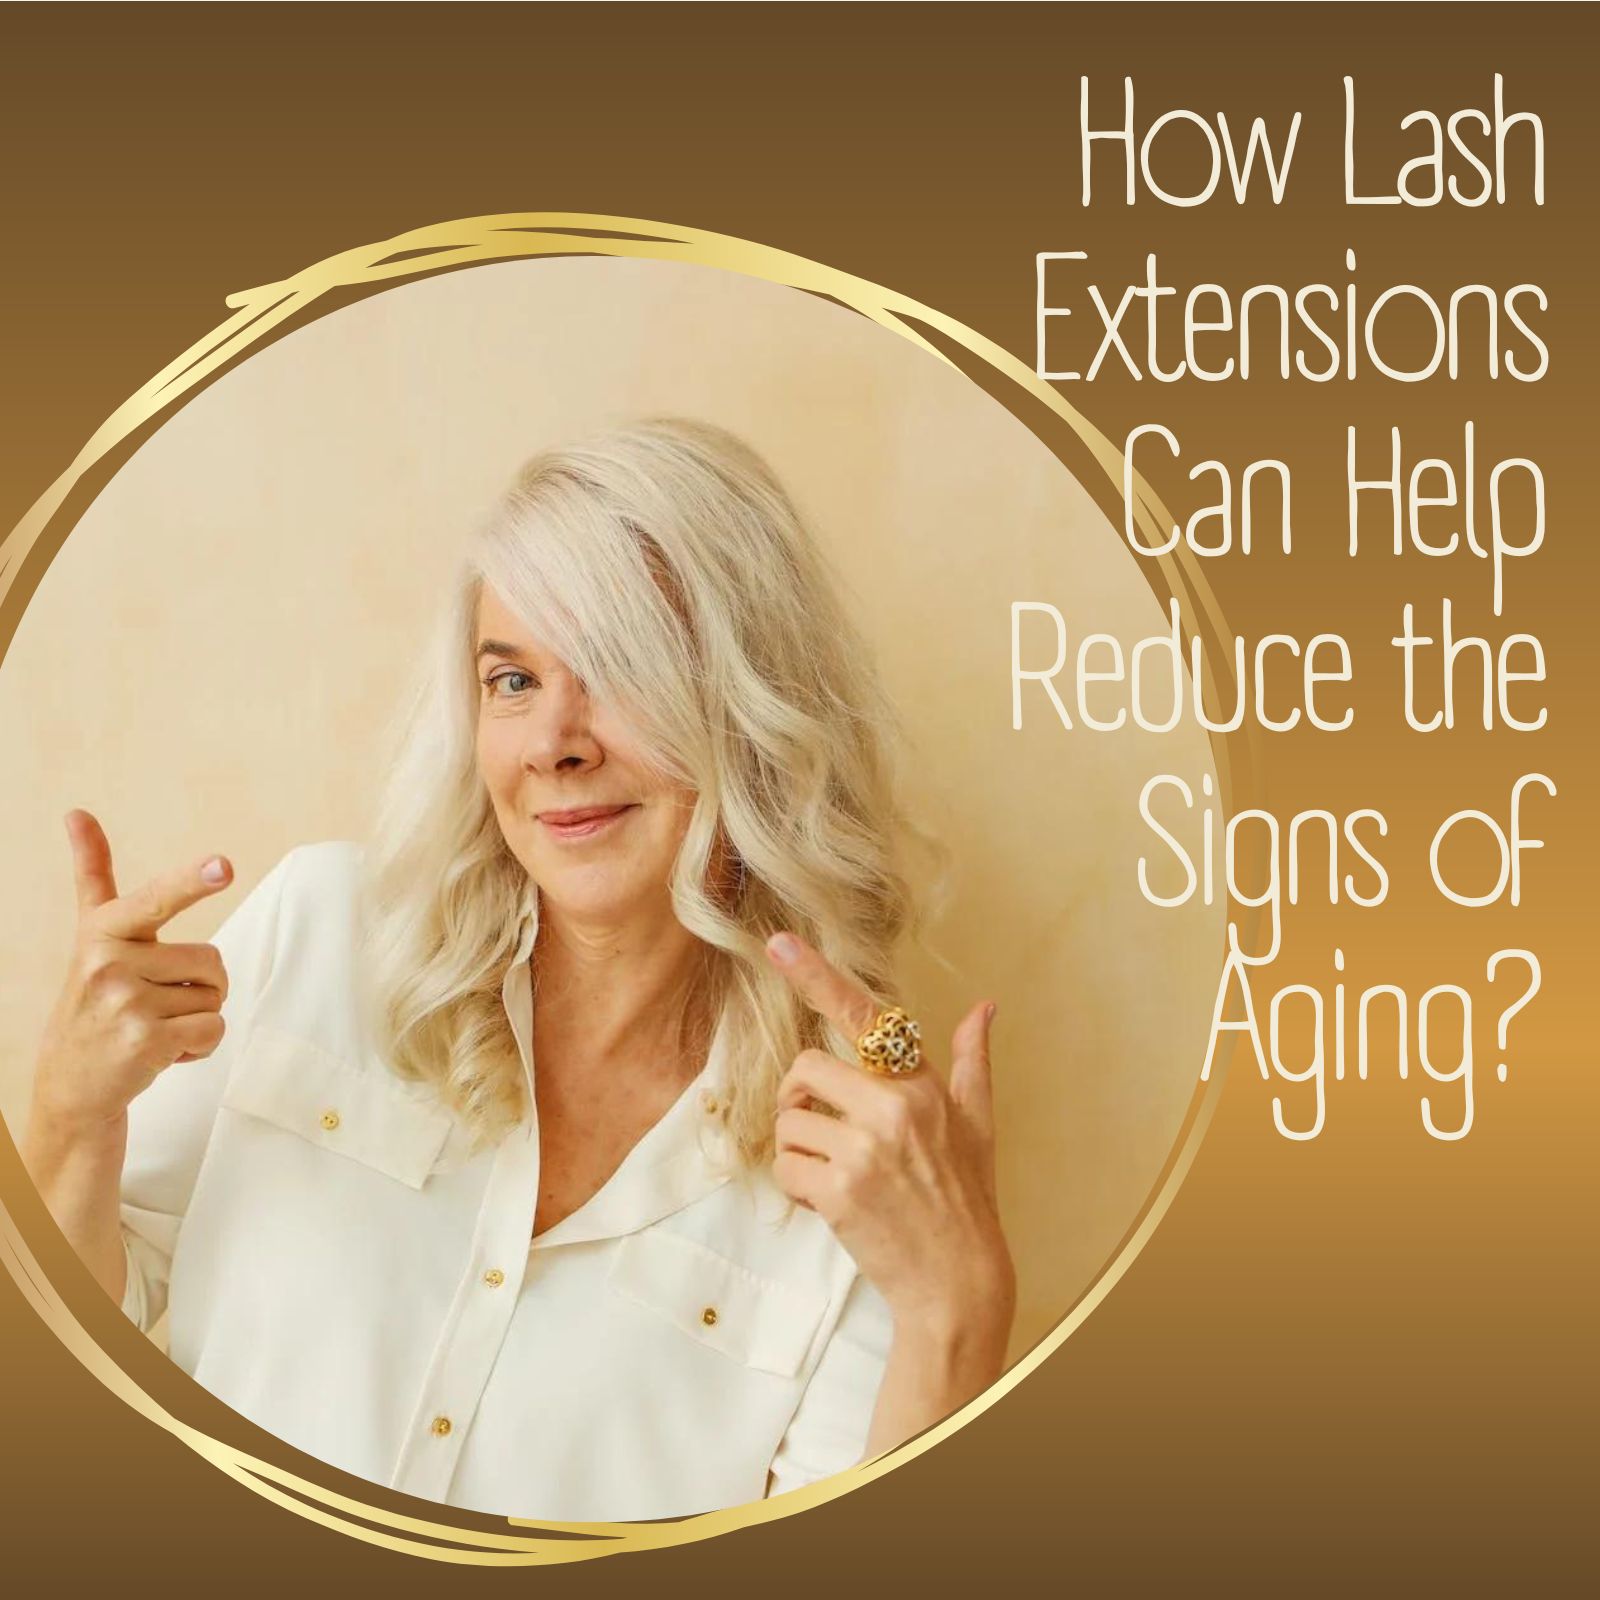 How Lash Extensions Can Help Reduce the Signs of Aging?